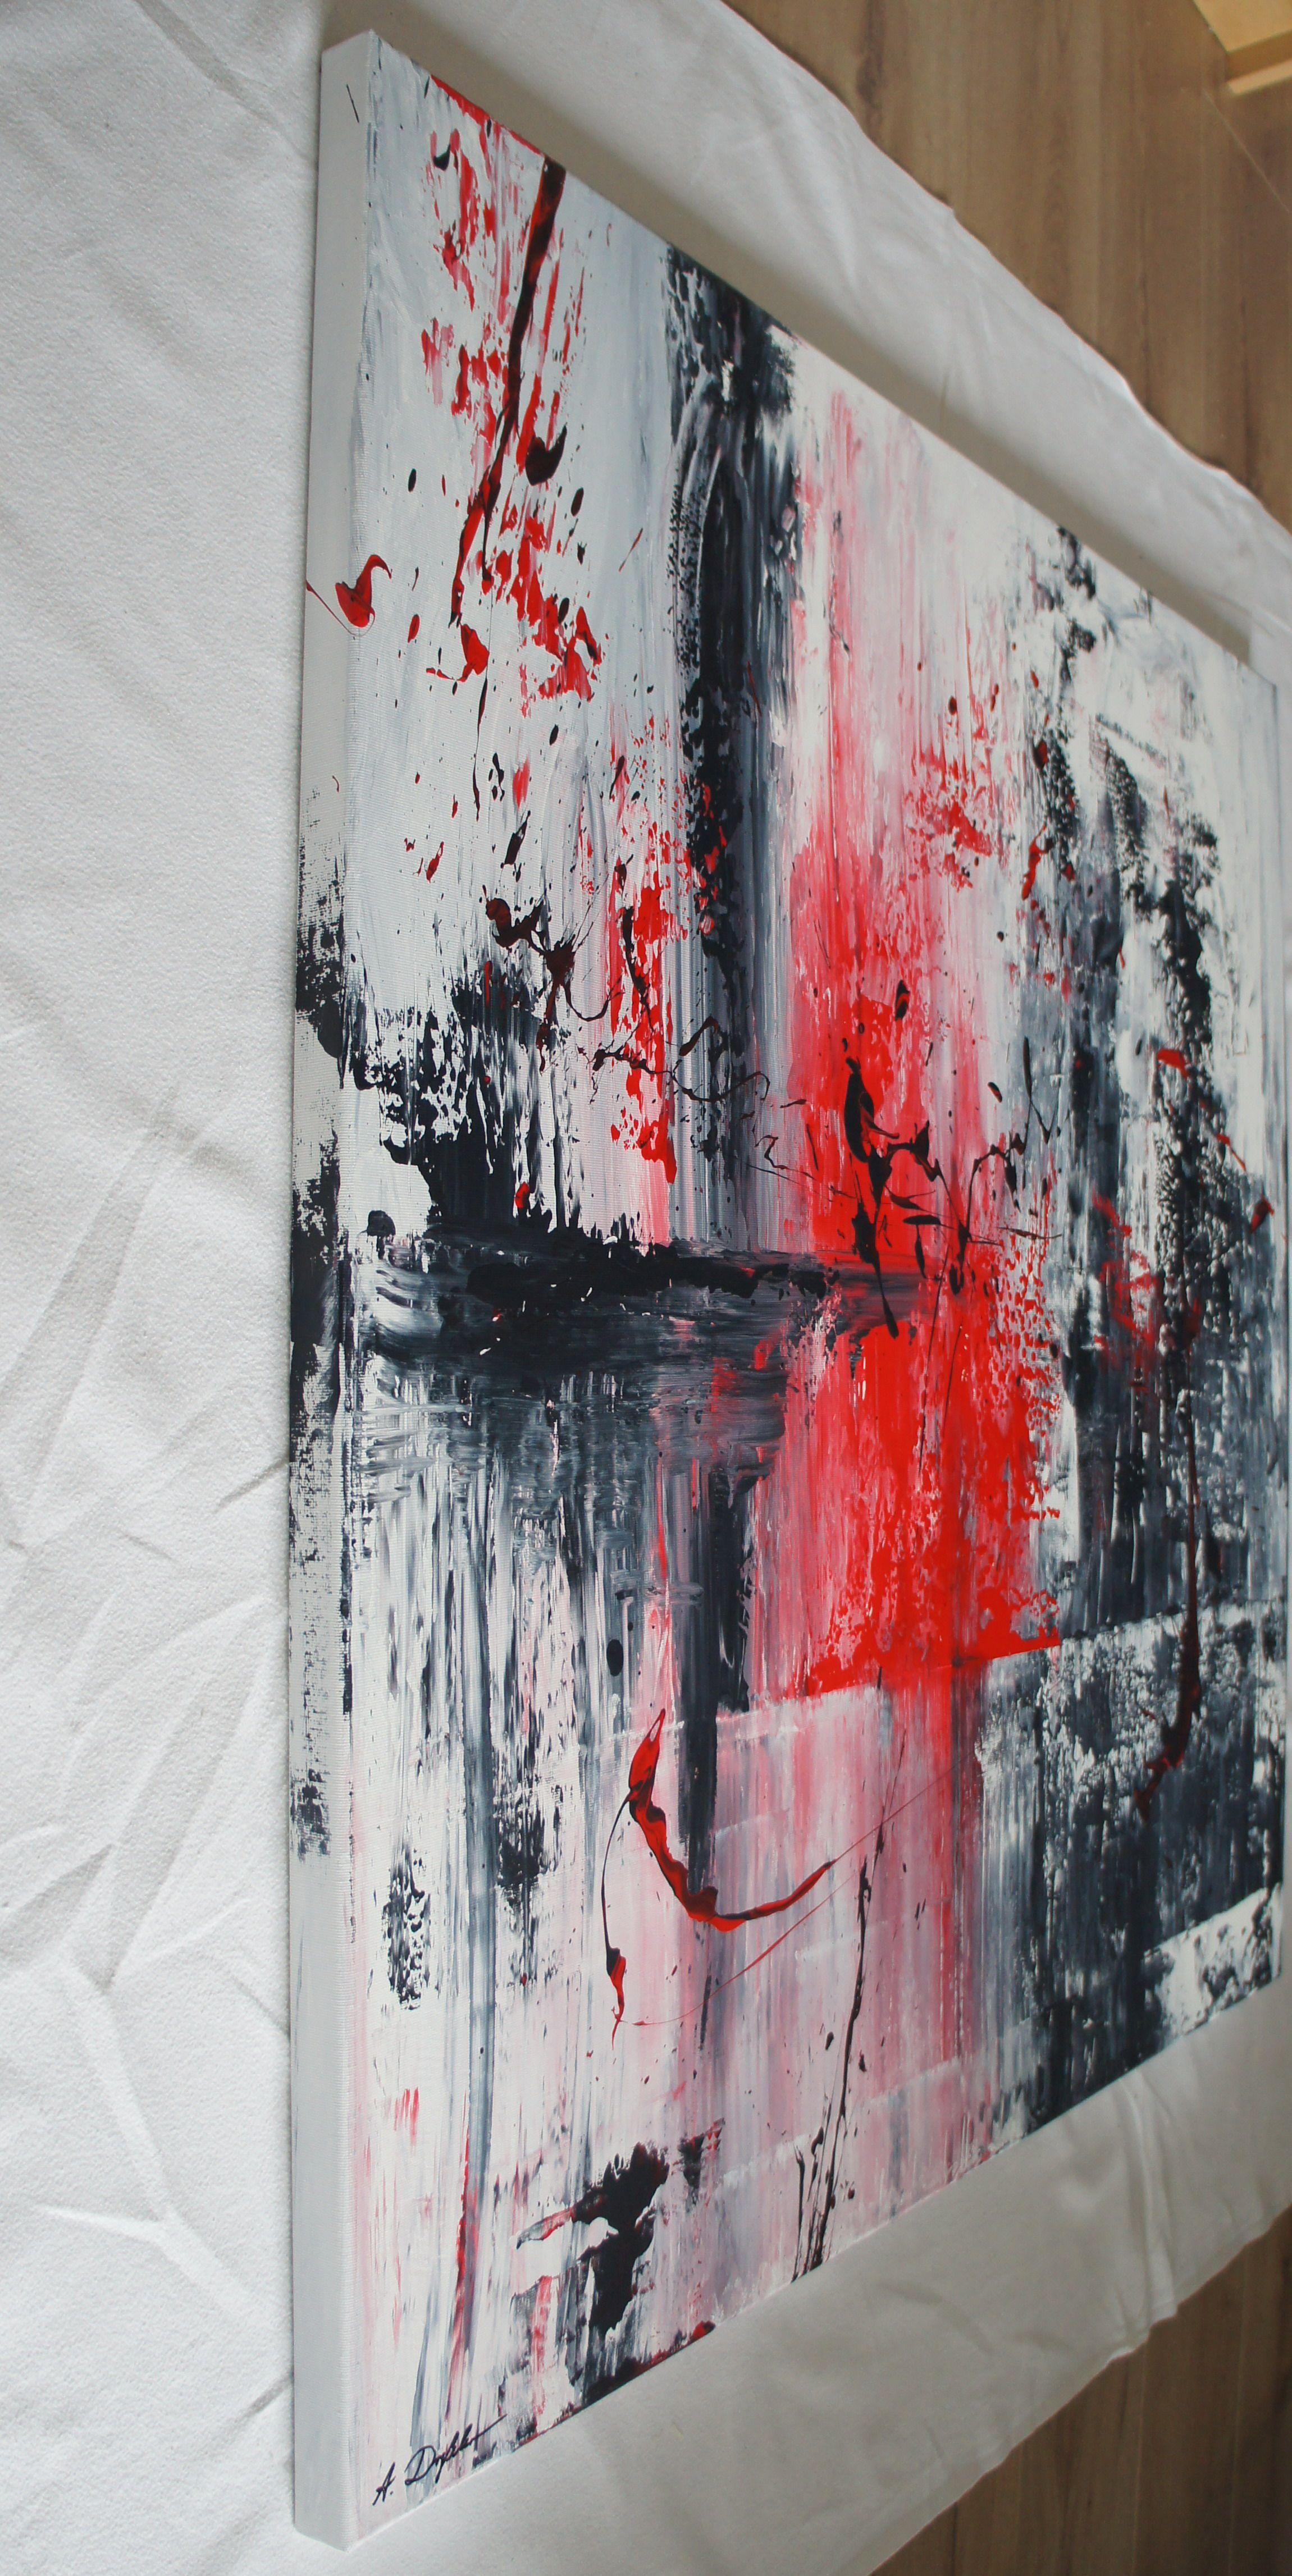 Blood Brain Barrier (100 x 100 cm) (40x40 inches), Painting, Acrylic on Canvas - Gray Abstract Painting by Ansgar Dressler